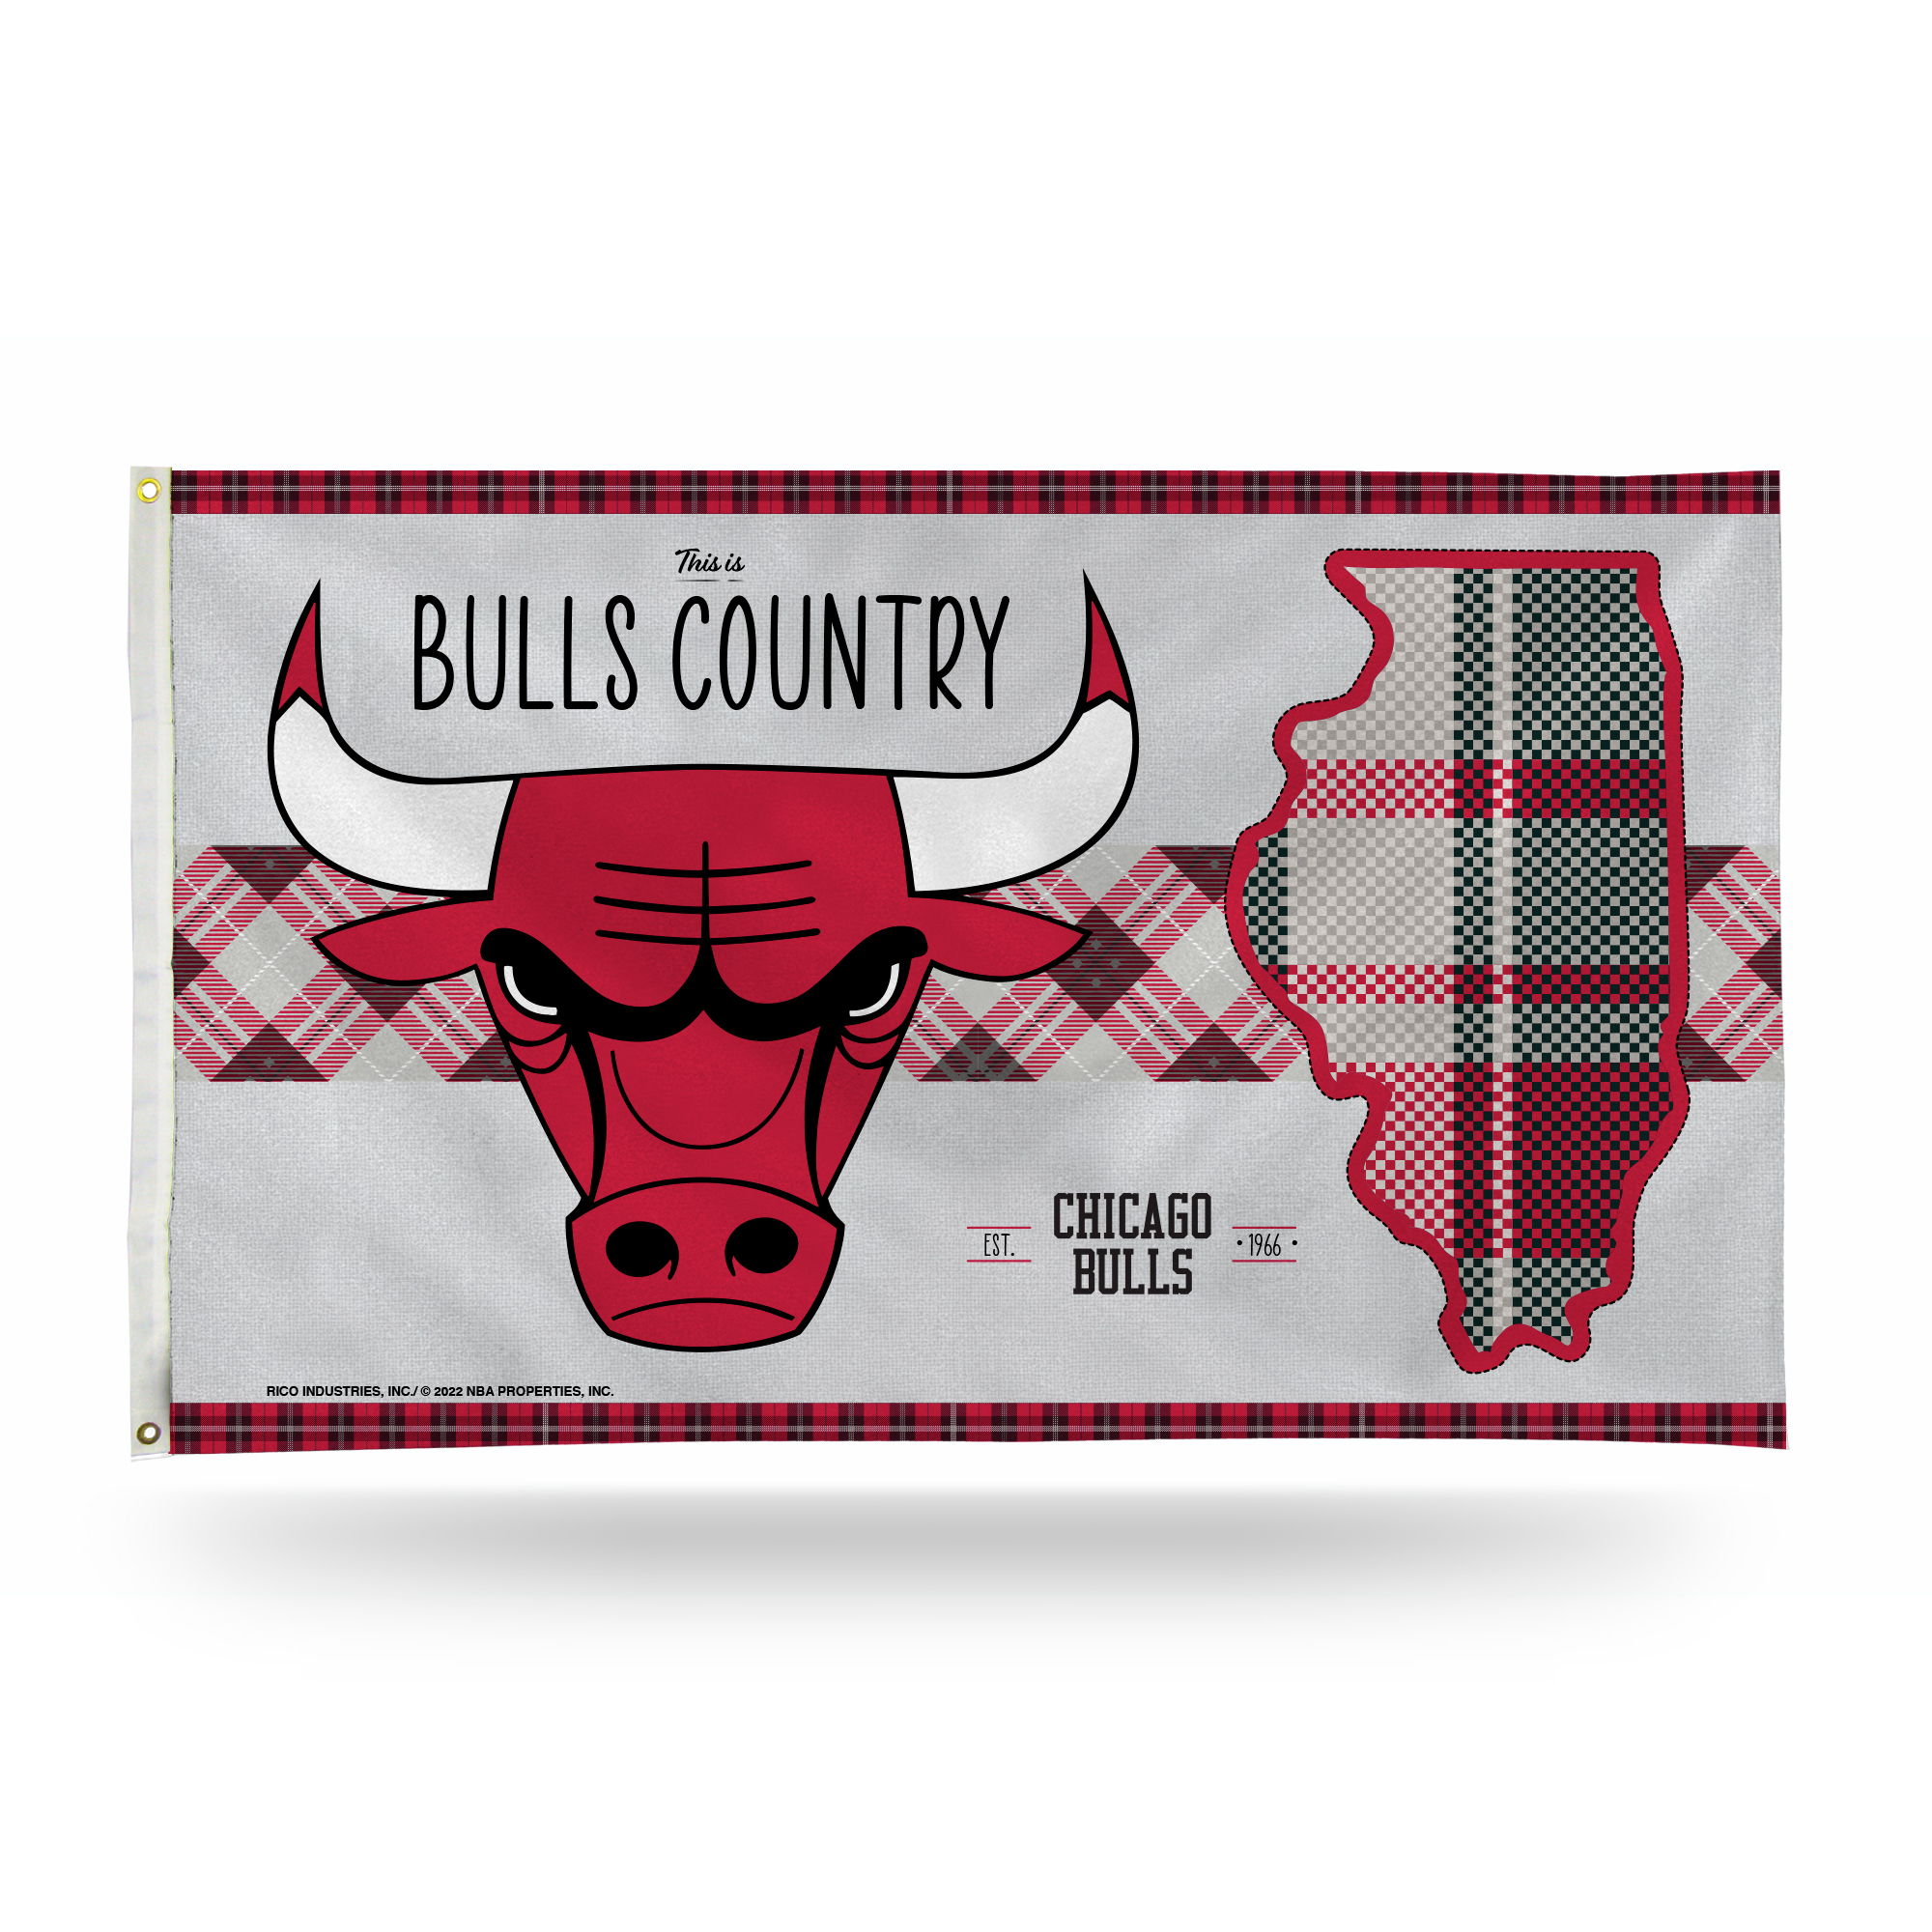 Rico Industries NBA Basketball Chicago Bulls This is Bulls Country 3' x 5' Banner Flag